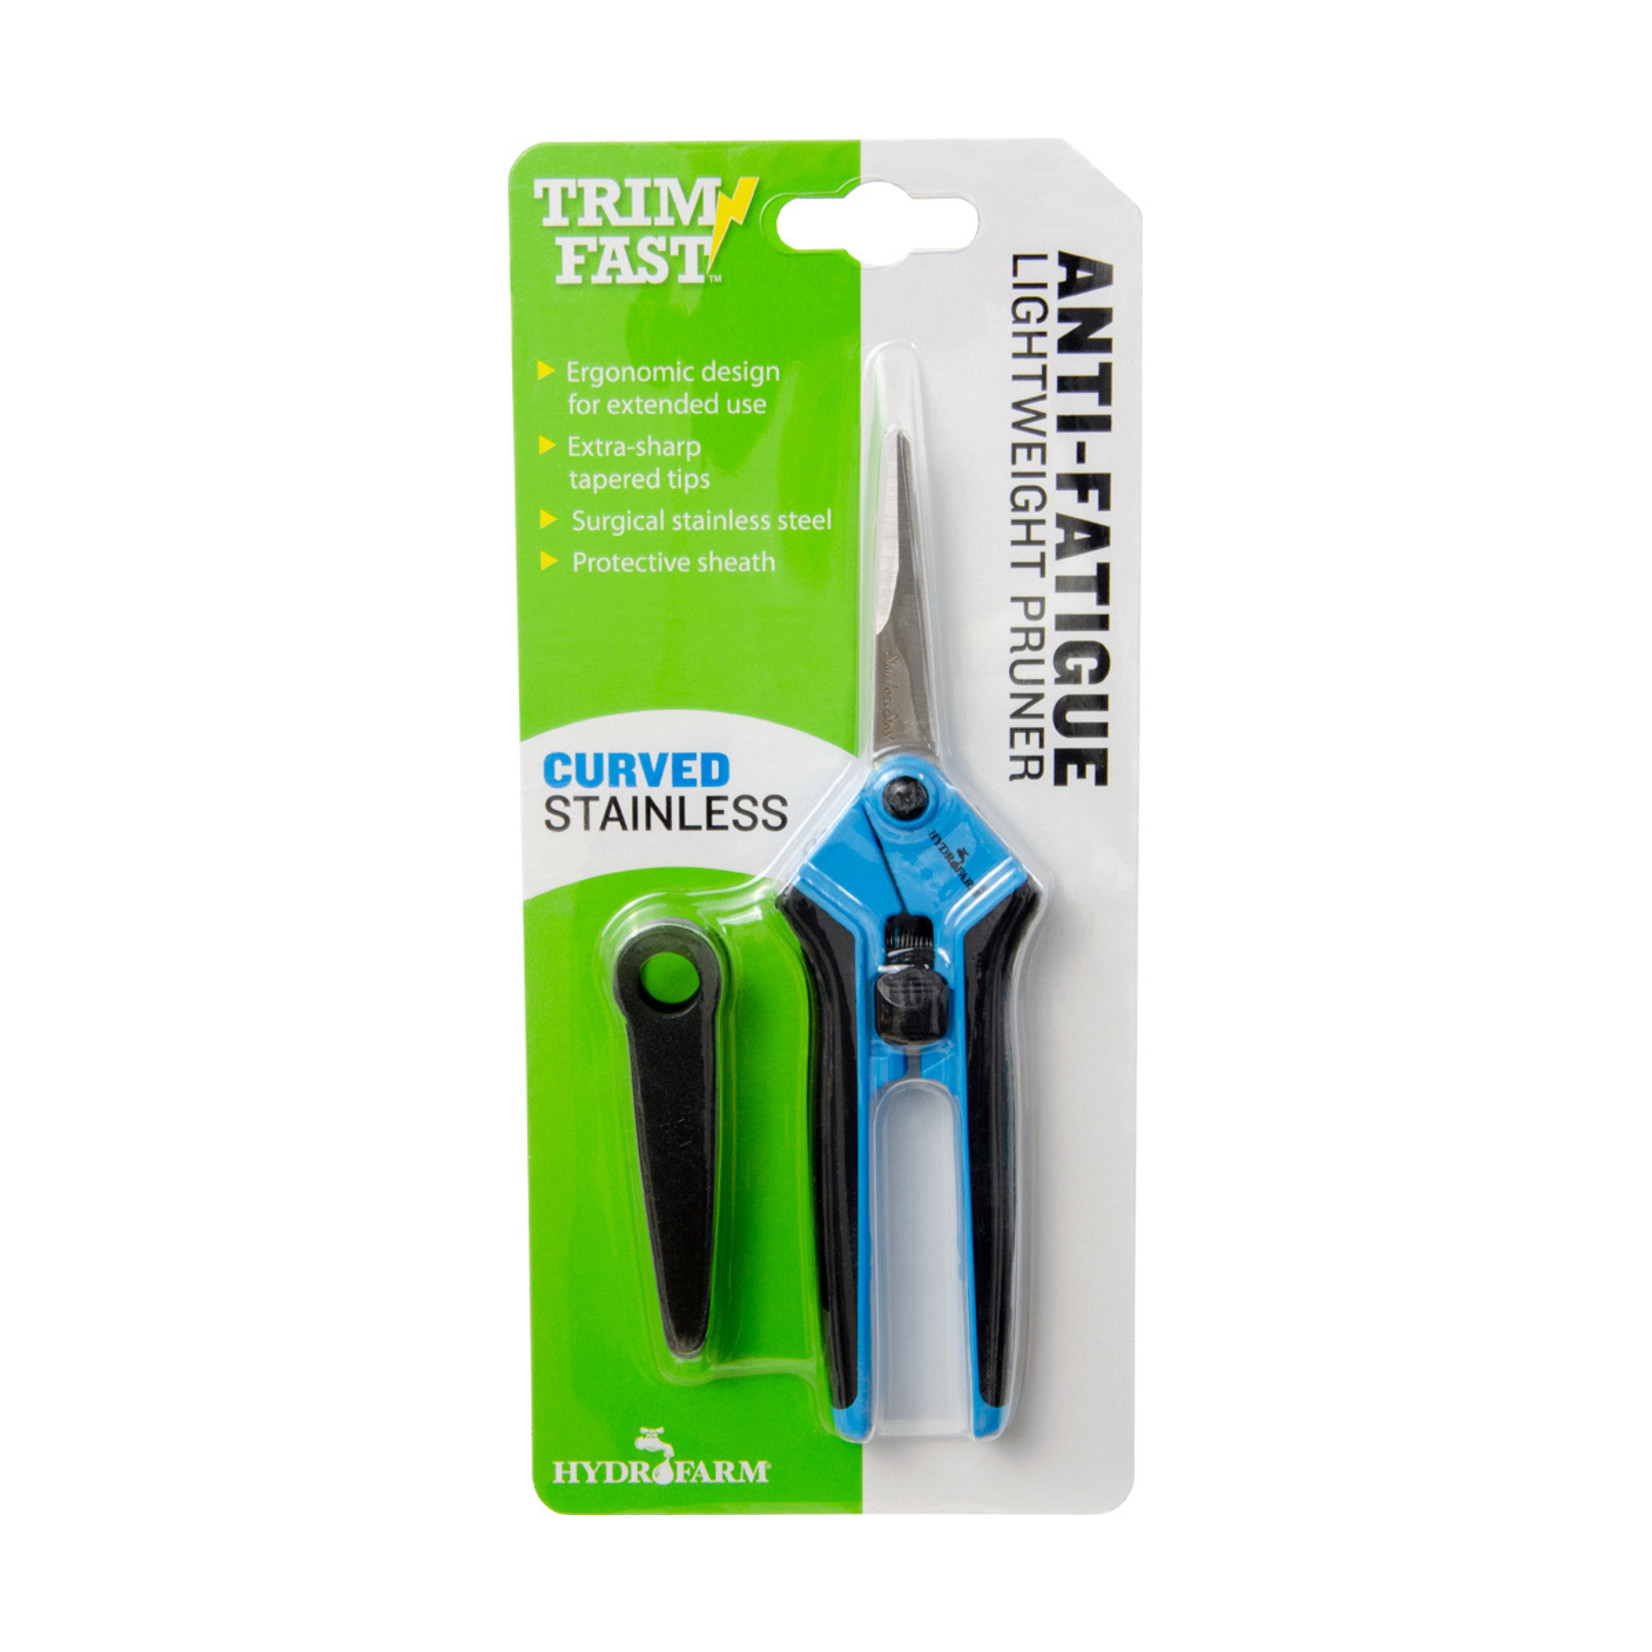 TRIM FAST Precision Pruner Curved Anti-Fatigue Stainless